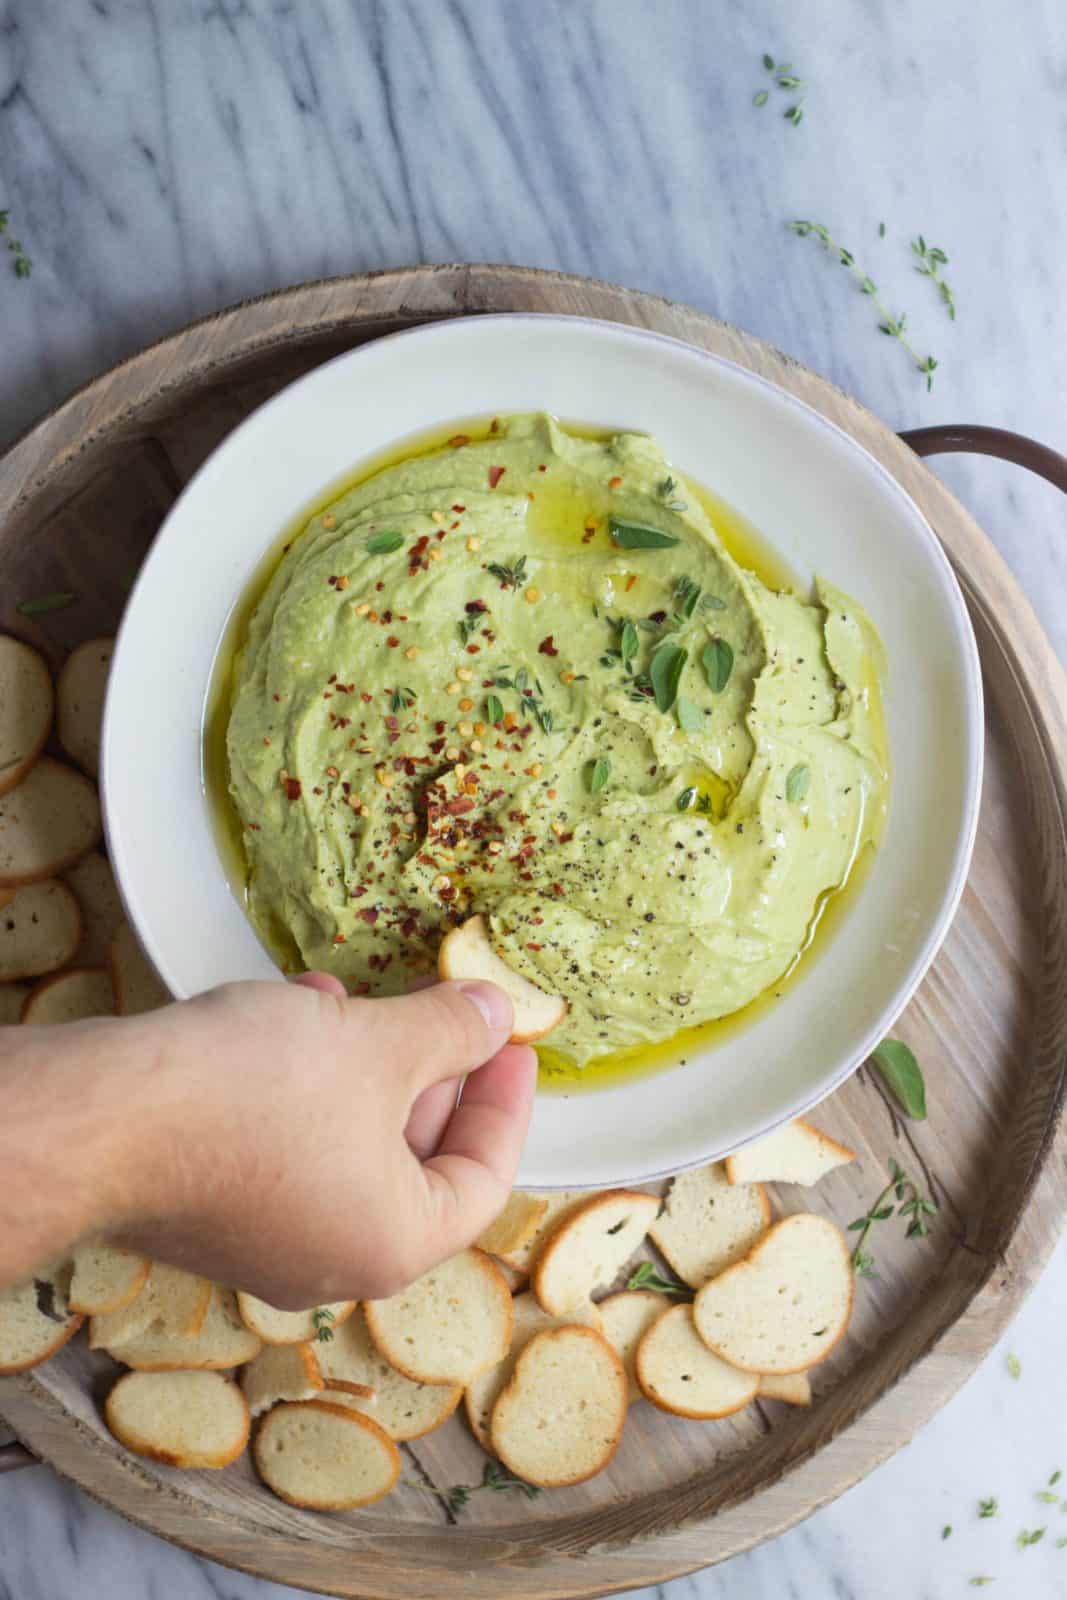 Whipped avocado white bean dip being dipped in a white bowl